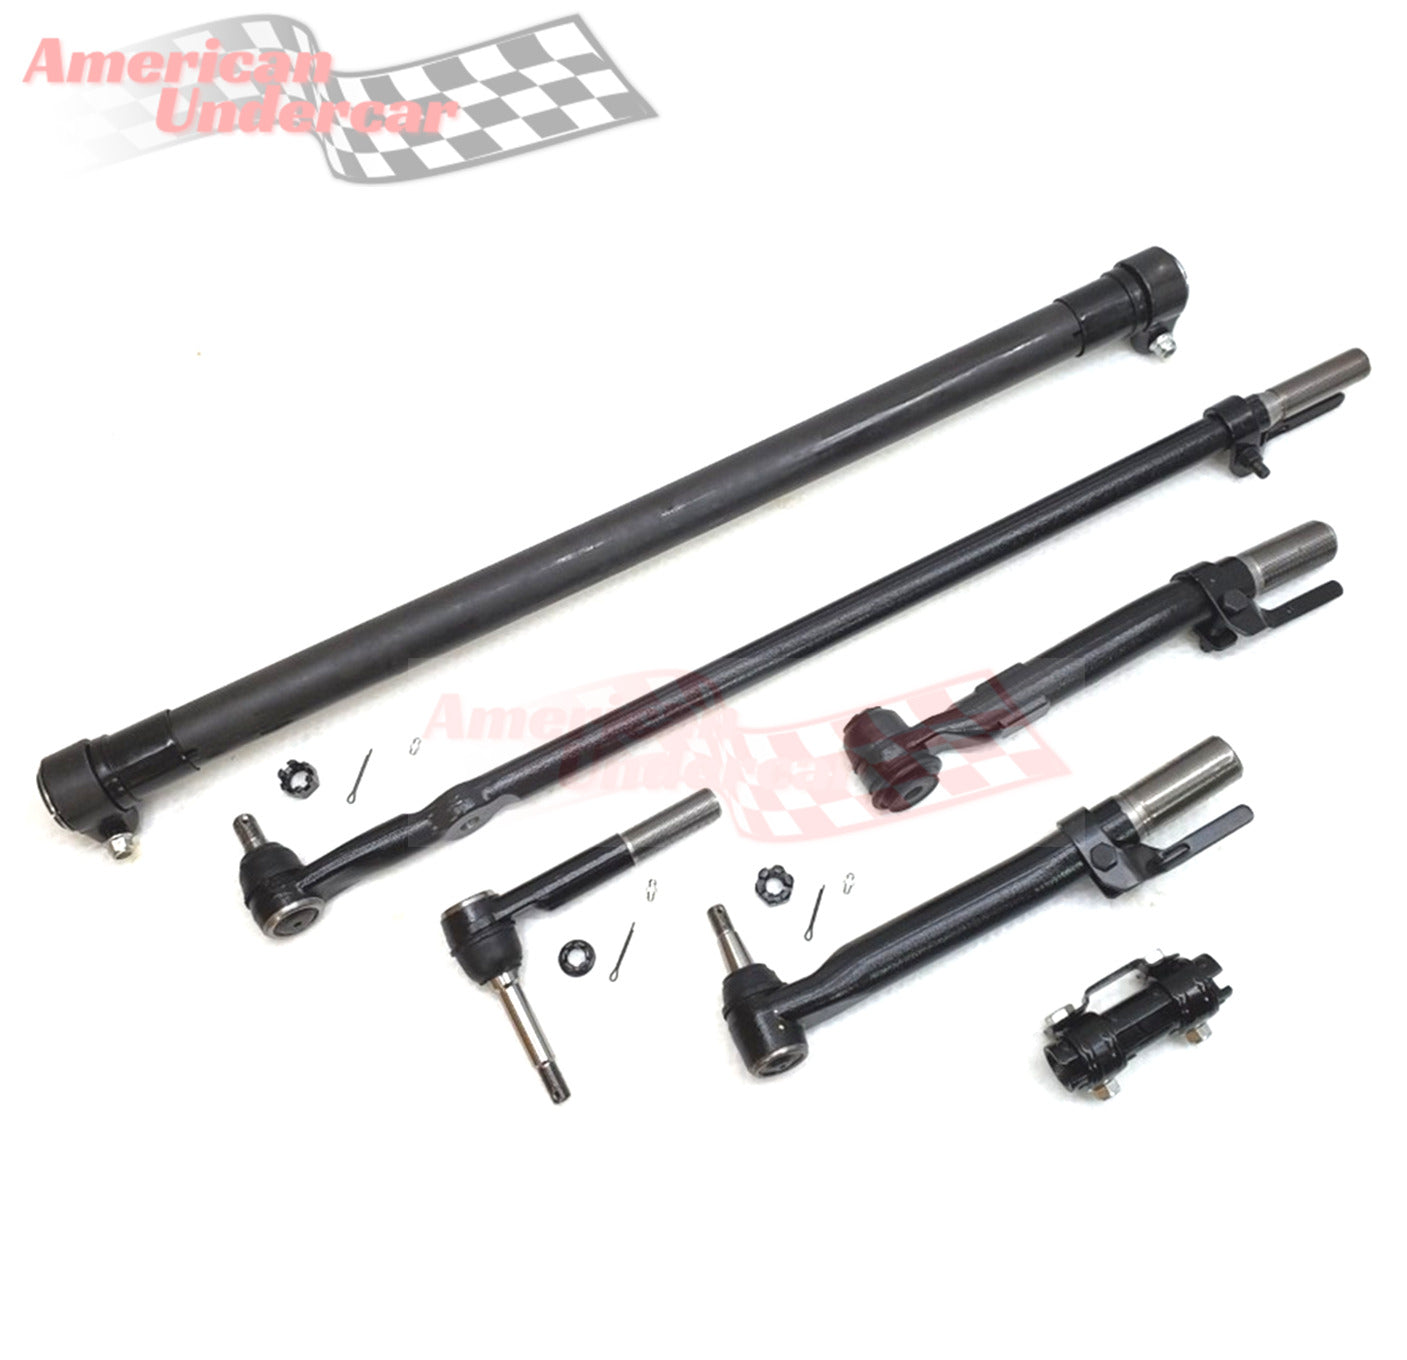 XRF Steering and Suspension Kit for 2011-2016 Ford F550 Super Duty 4x4